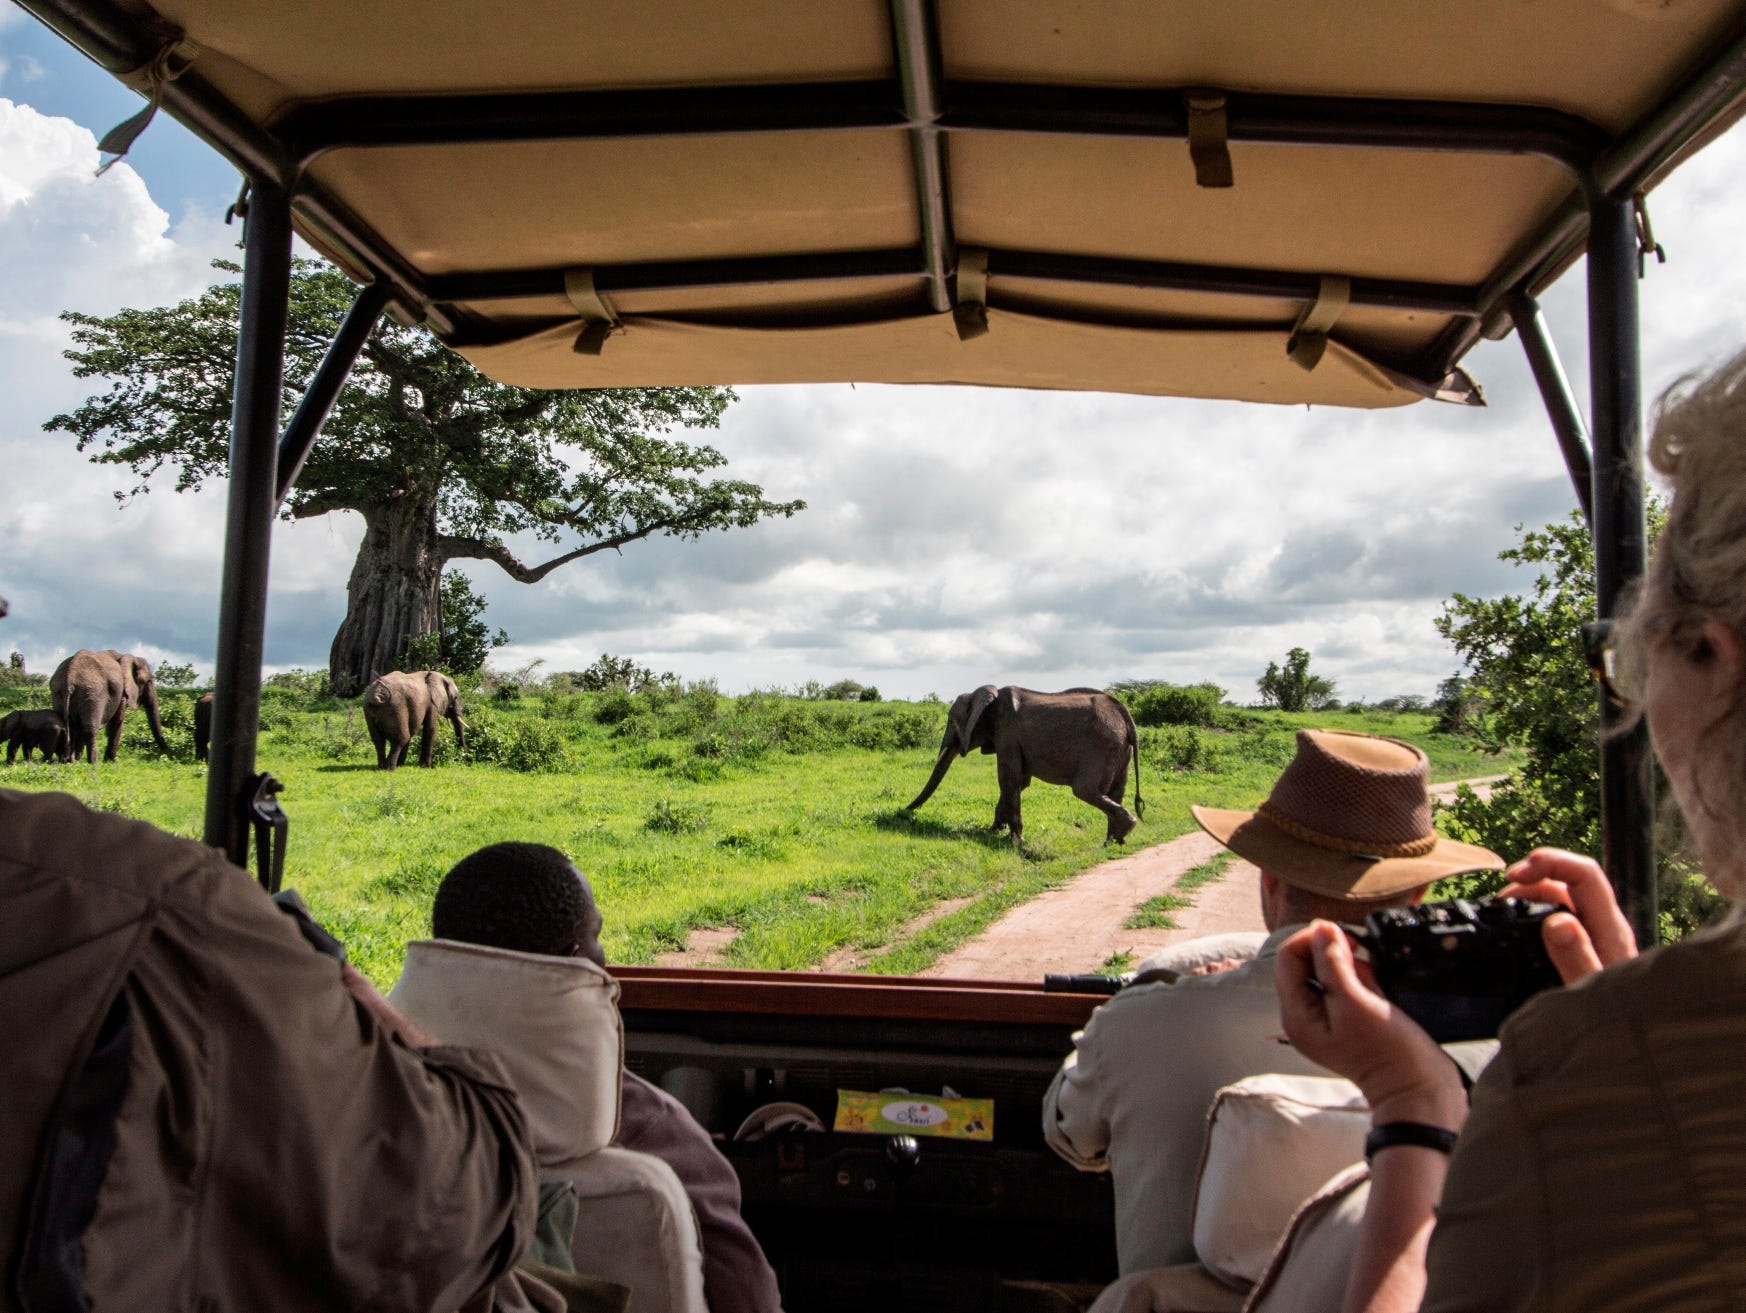 Safaris are on sale in places like Tanzania due to Ebola fears -- although the infected areas are closer to Europe and Brazil than many parts of Africa.